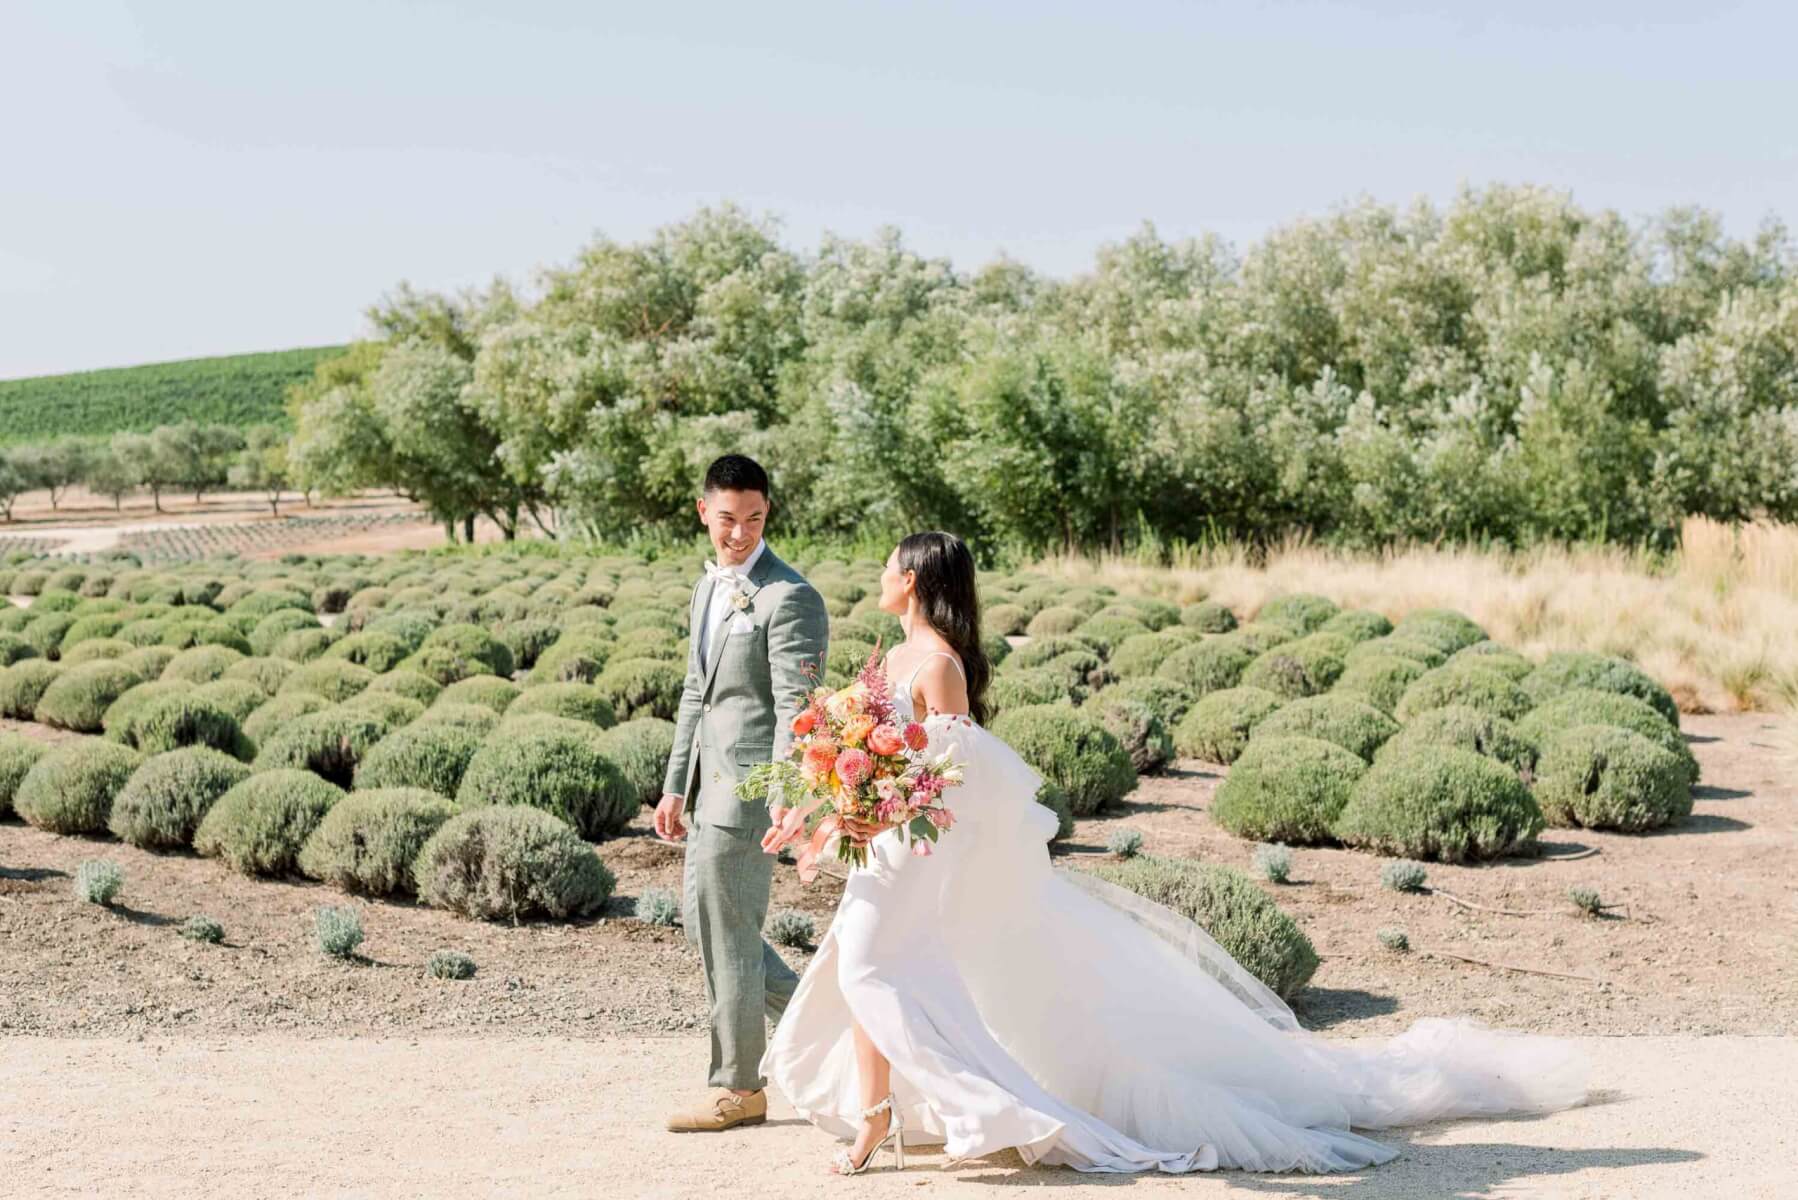 The groom and bride, holding the bridal bouquet of colorful butterfly ranunculus, cosmos, and dahlias, walk through a vineyard.